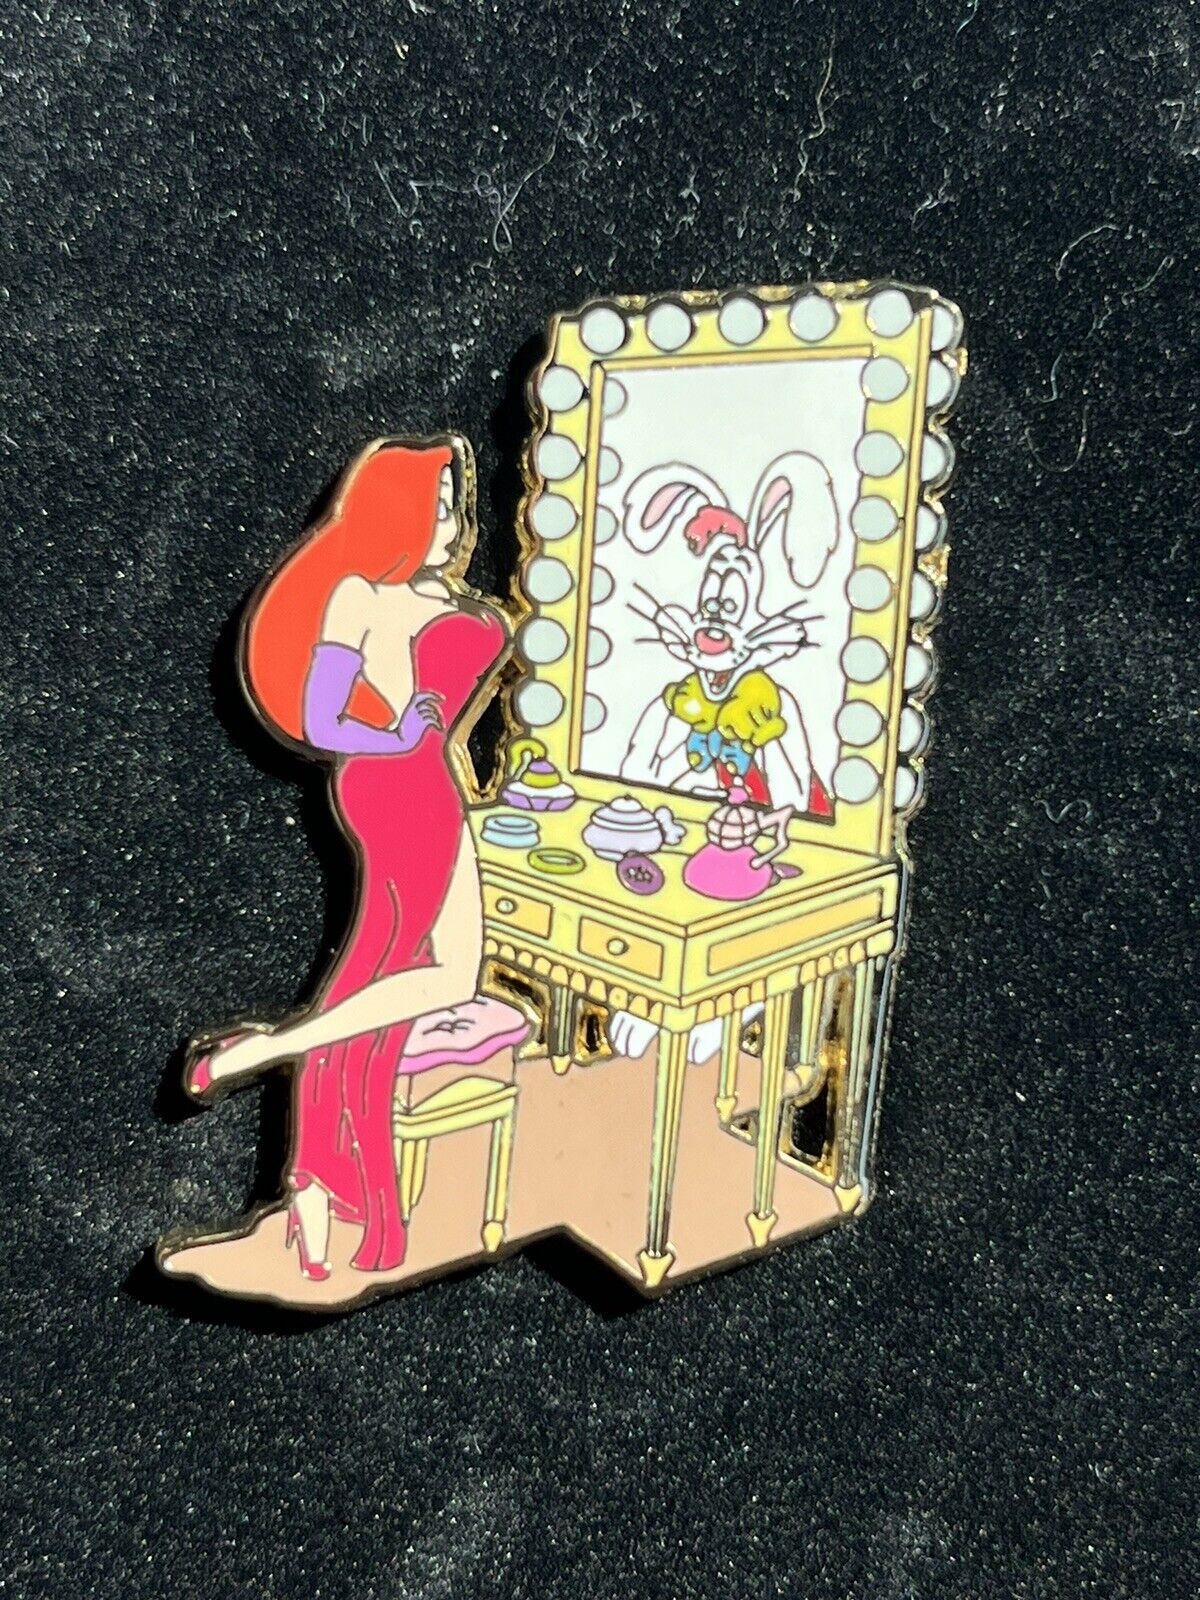 RARE JESSICA RABBIT At HER VANITY W/ ROGER IN THE MIRROR LE 250 NOC